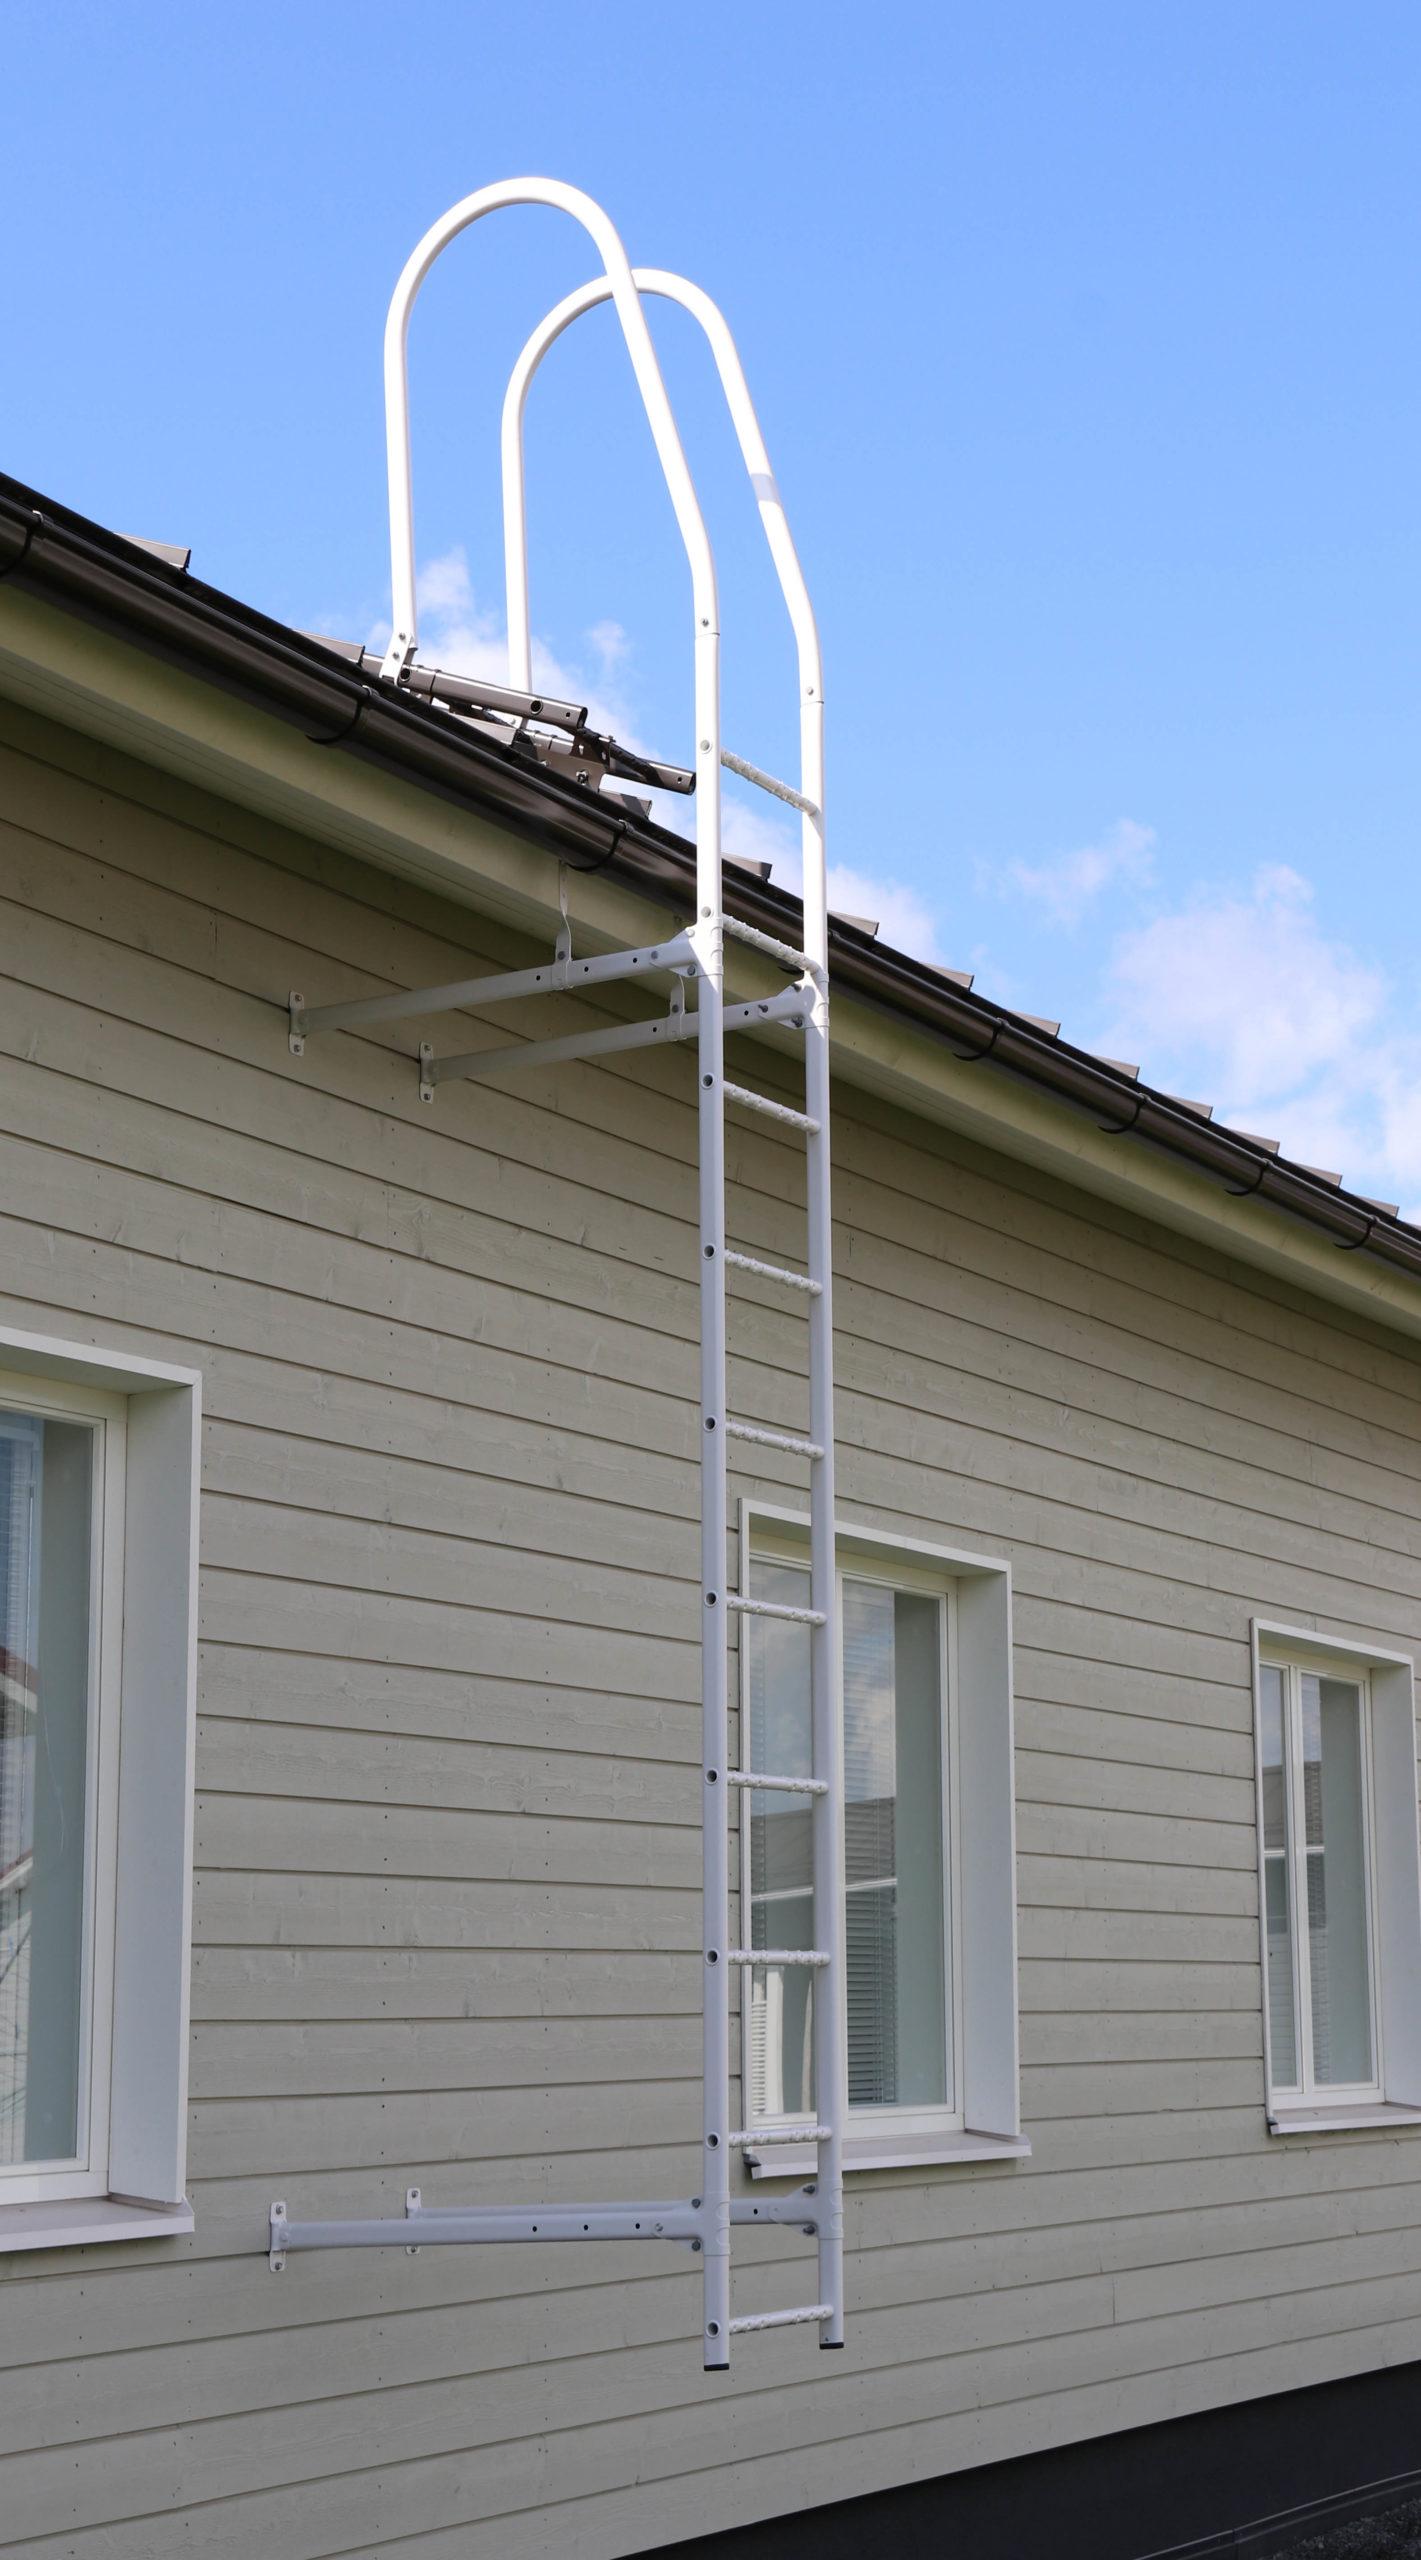 Pisko wall ladder is a safe access route to the roof of a detached house.